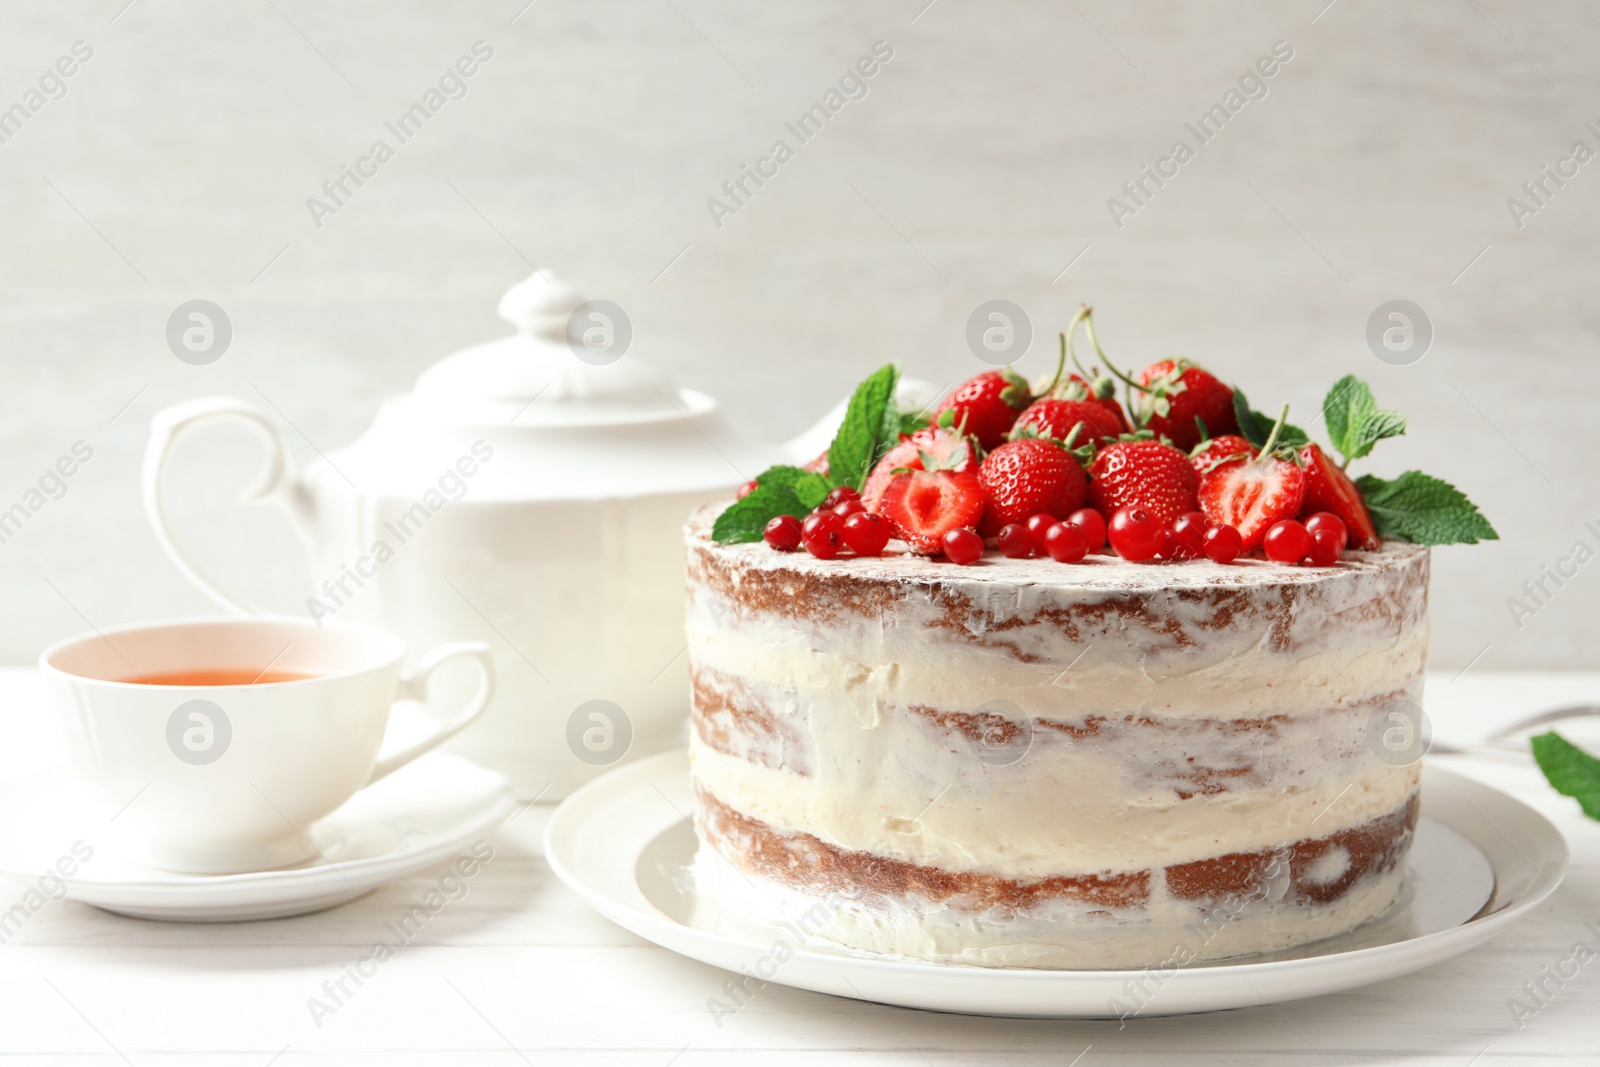 Photo of Delicious homemade cake with fresh berries served on wooden table